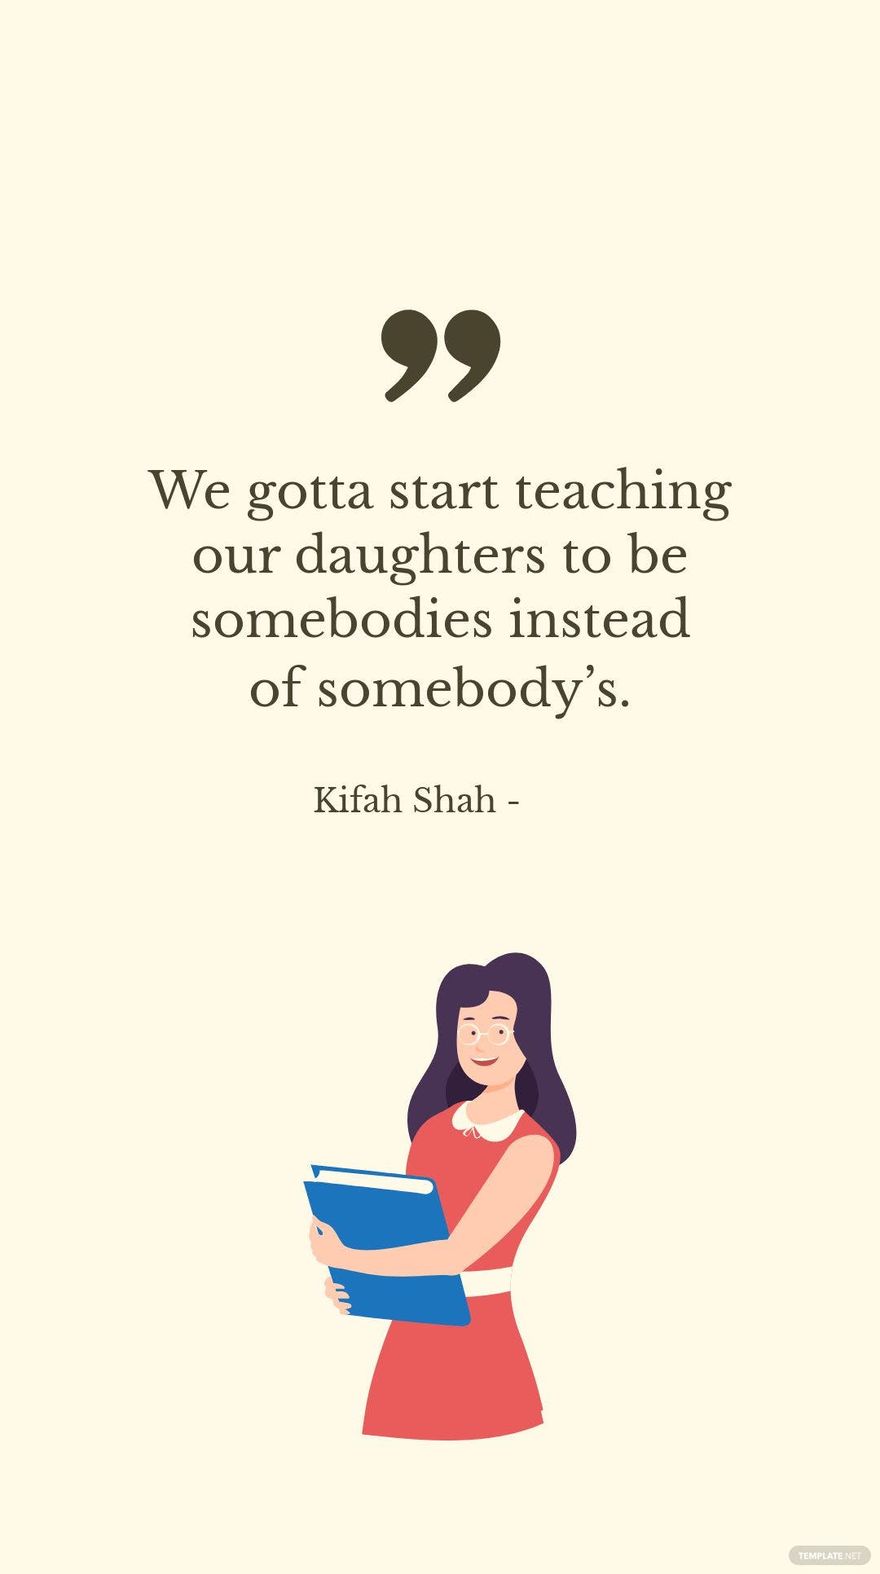 KIFAH SHAH - We gotta start teaching our daughters to be somebodies instead of somebody’s. in JPG